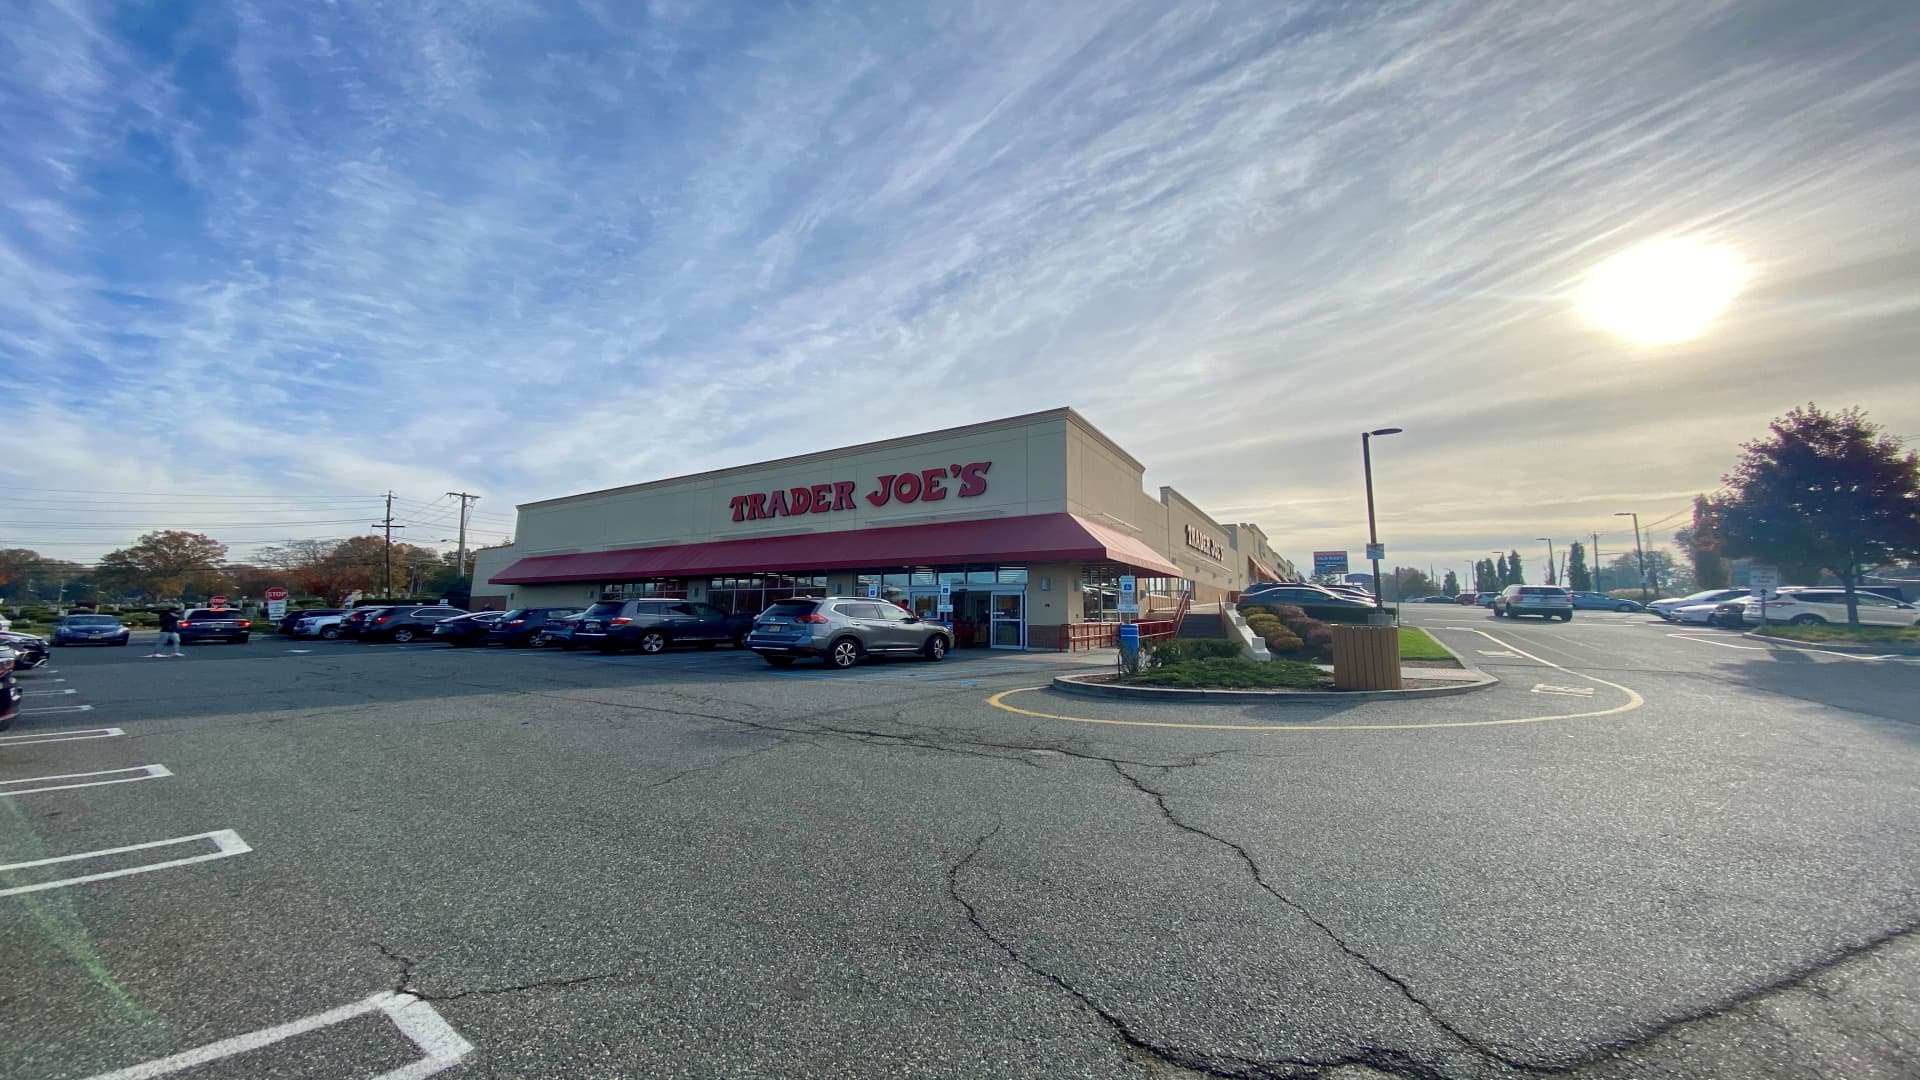 A quiet morning at Trader Joe's located in Clifton, New Jersey.